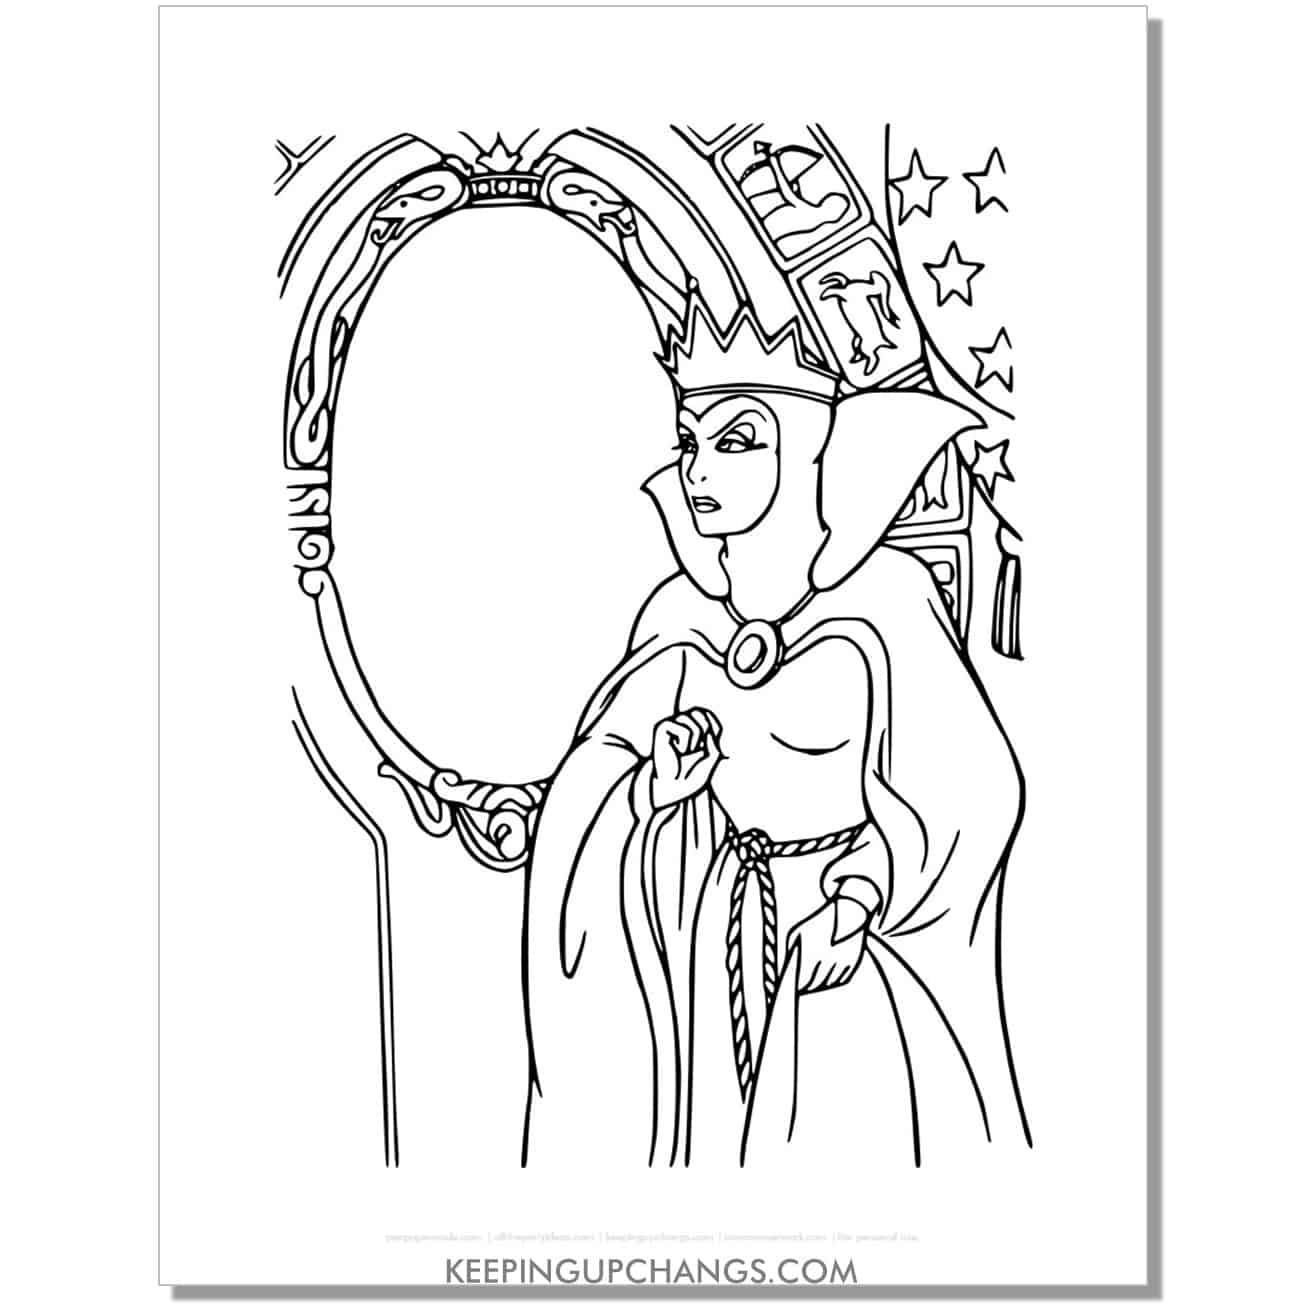 snow white evil queen looking at mirror on the wall coloring page, sheet.